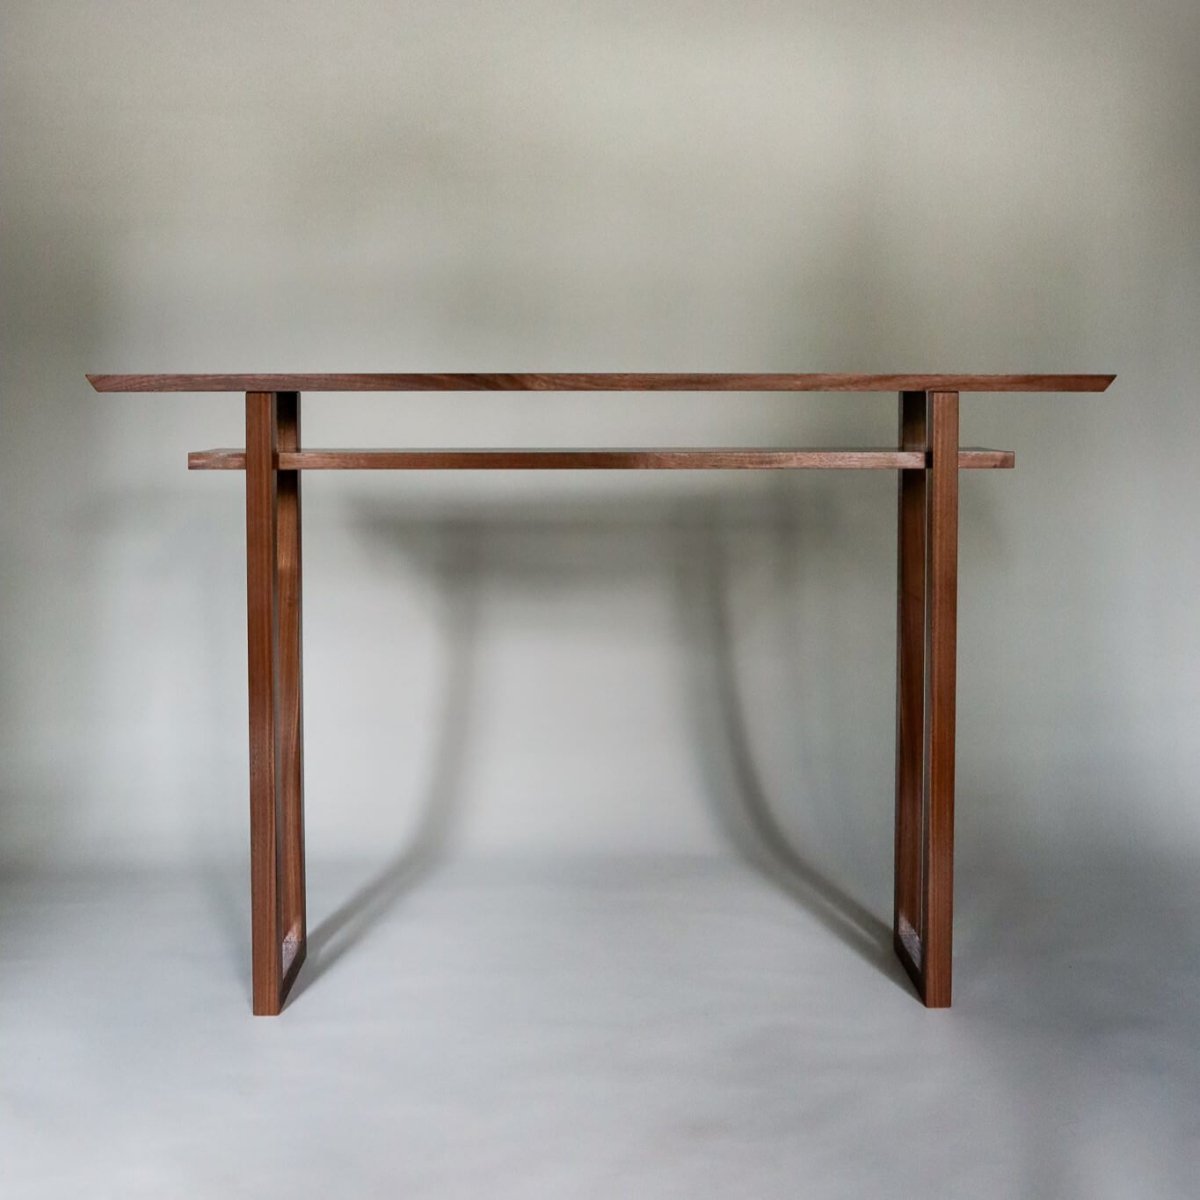 A narrow walnut console table with shelf for entryways by Mokuzai Furniture.